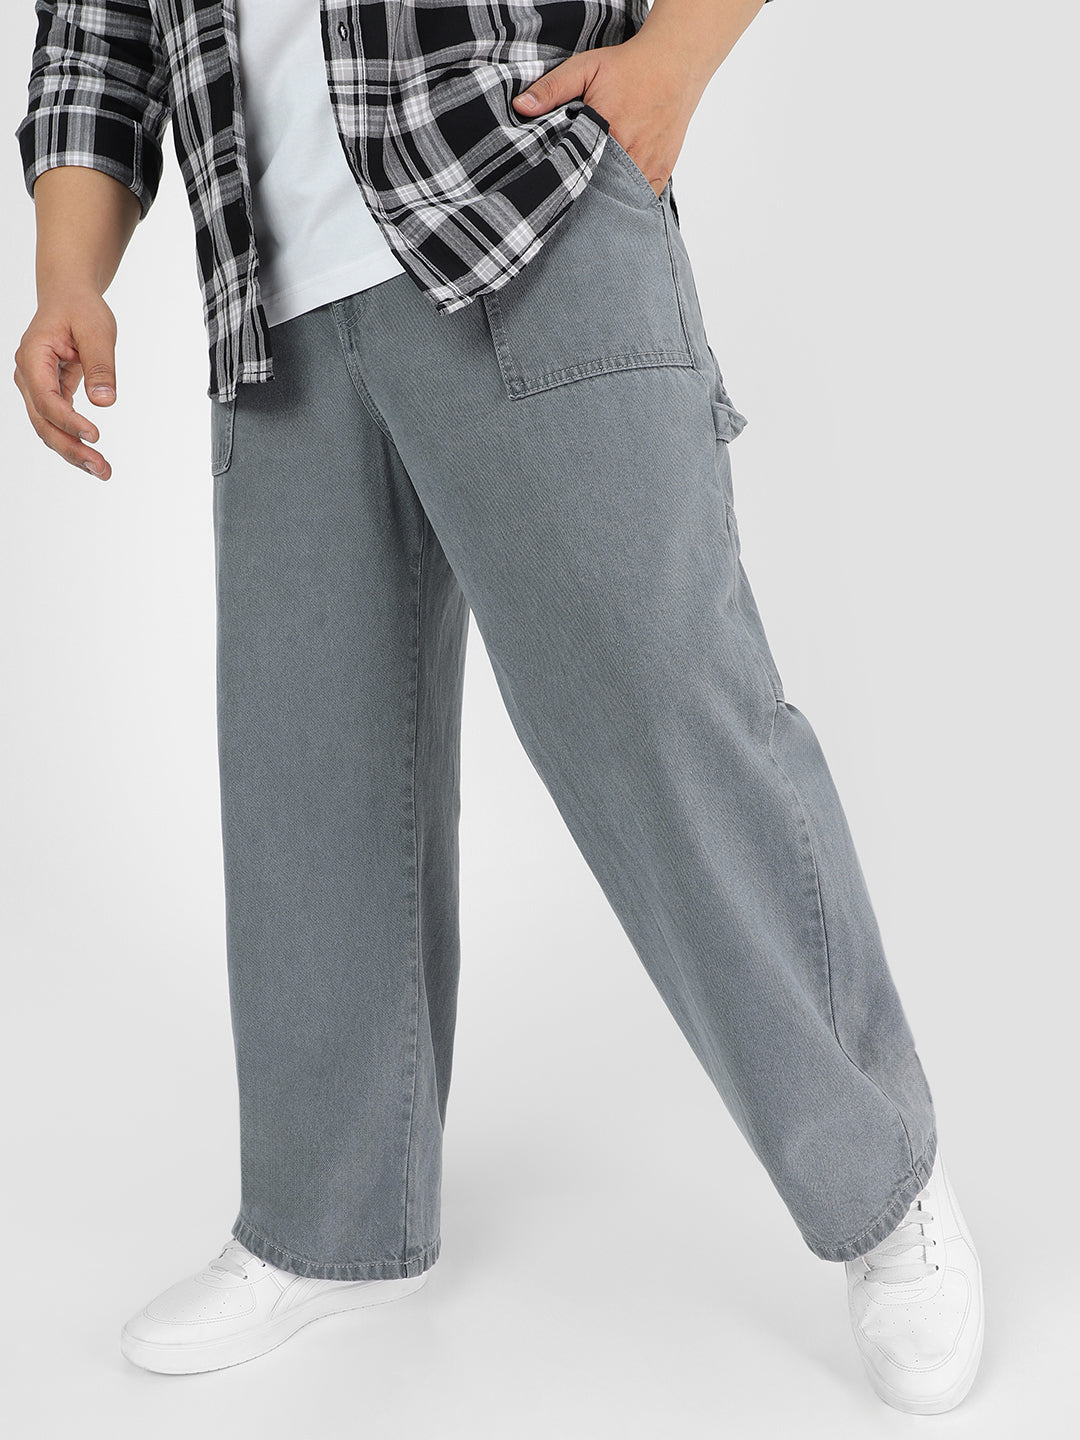 Plus Men's Light Grey Loose Baggy  Fit Carpenter Cargo Jeans With 6 Pockets Non-Stretchable